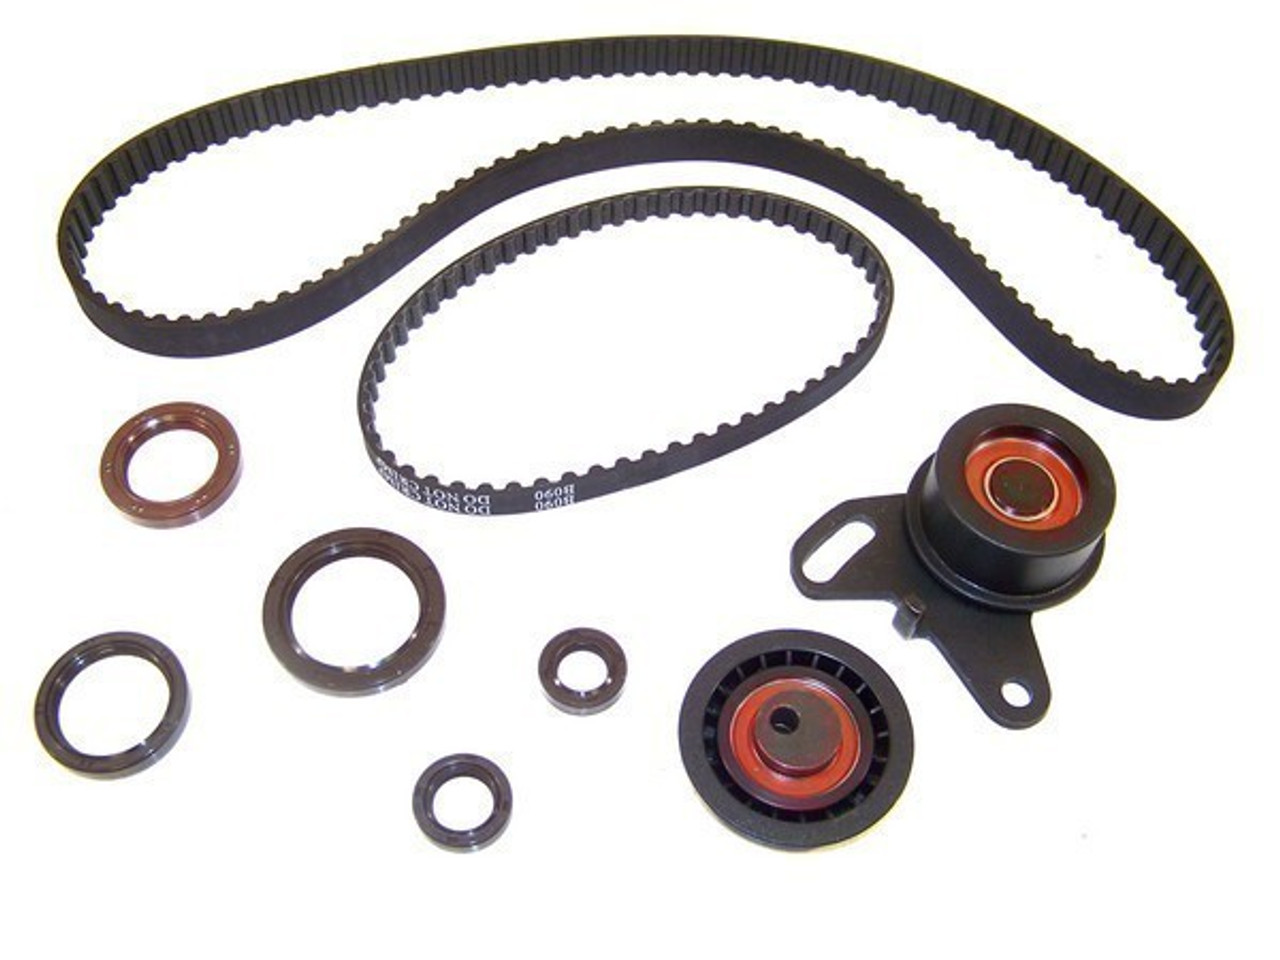 1991 Plymouth Colt 2.0L Engine Timing Belt Component Kit TBK105 -54